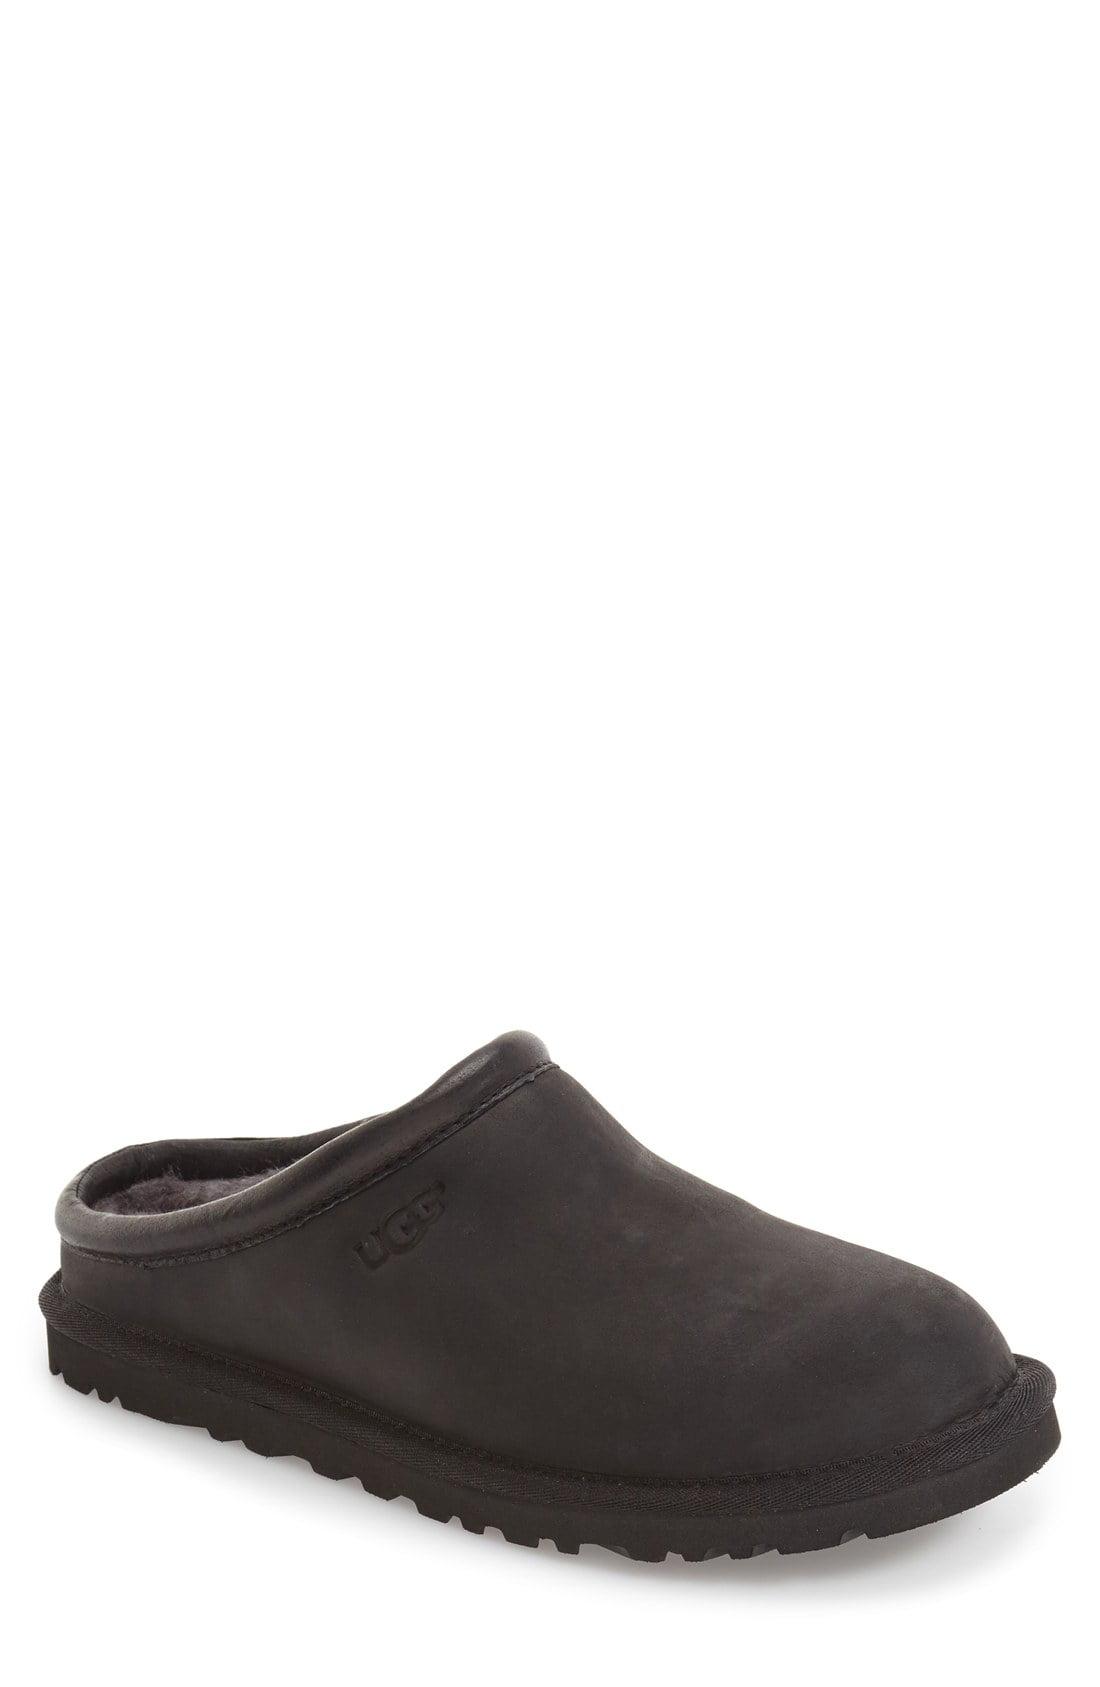 UGG Leather Classic Pure Lined Clog in Black for Men - Lyst